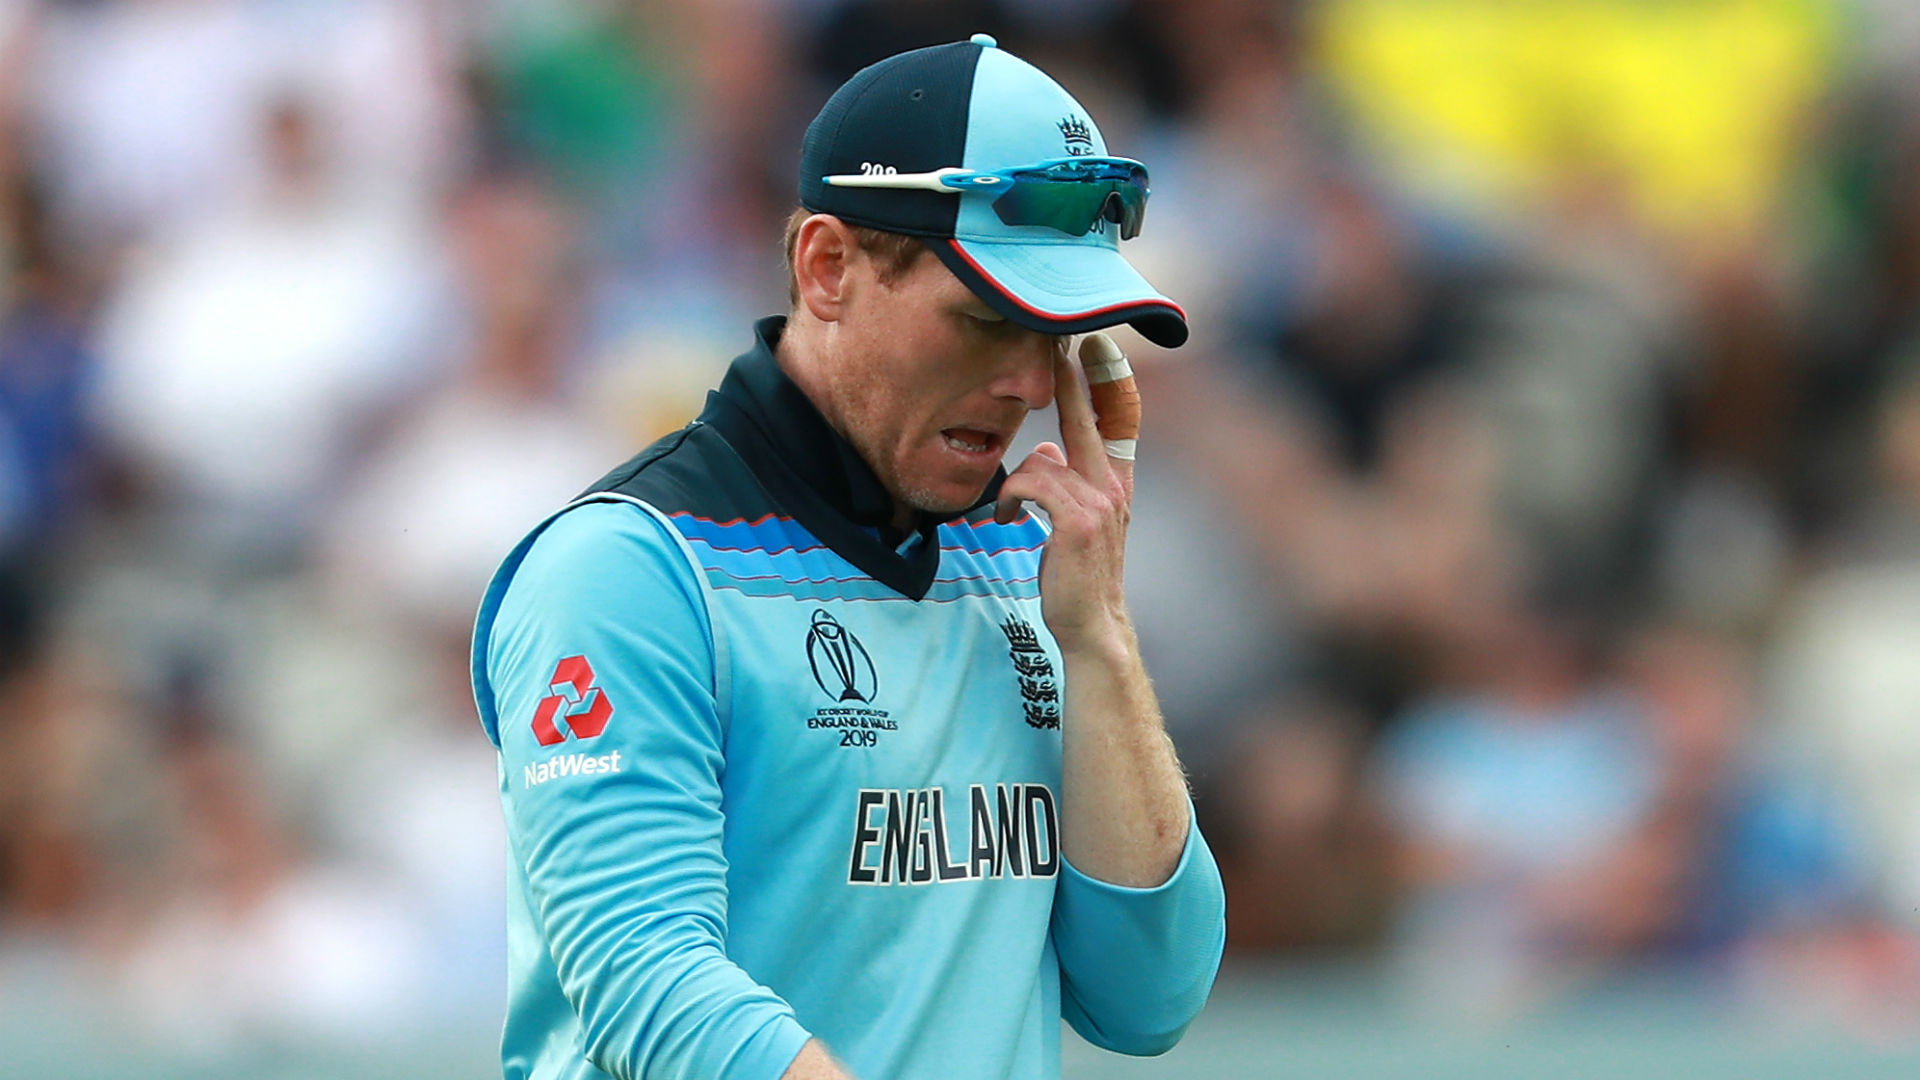 Australia beat England by 64 runs at Lord's on Tuesday, but Eoin Morgan is still optimistic over the hosts' chances of progressing.